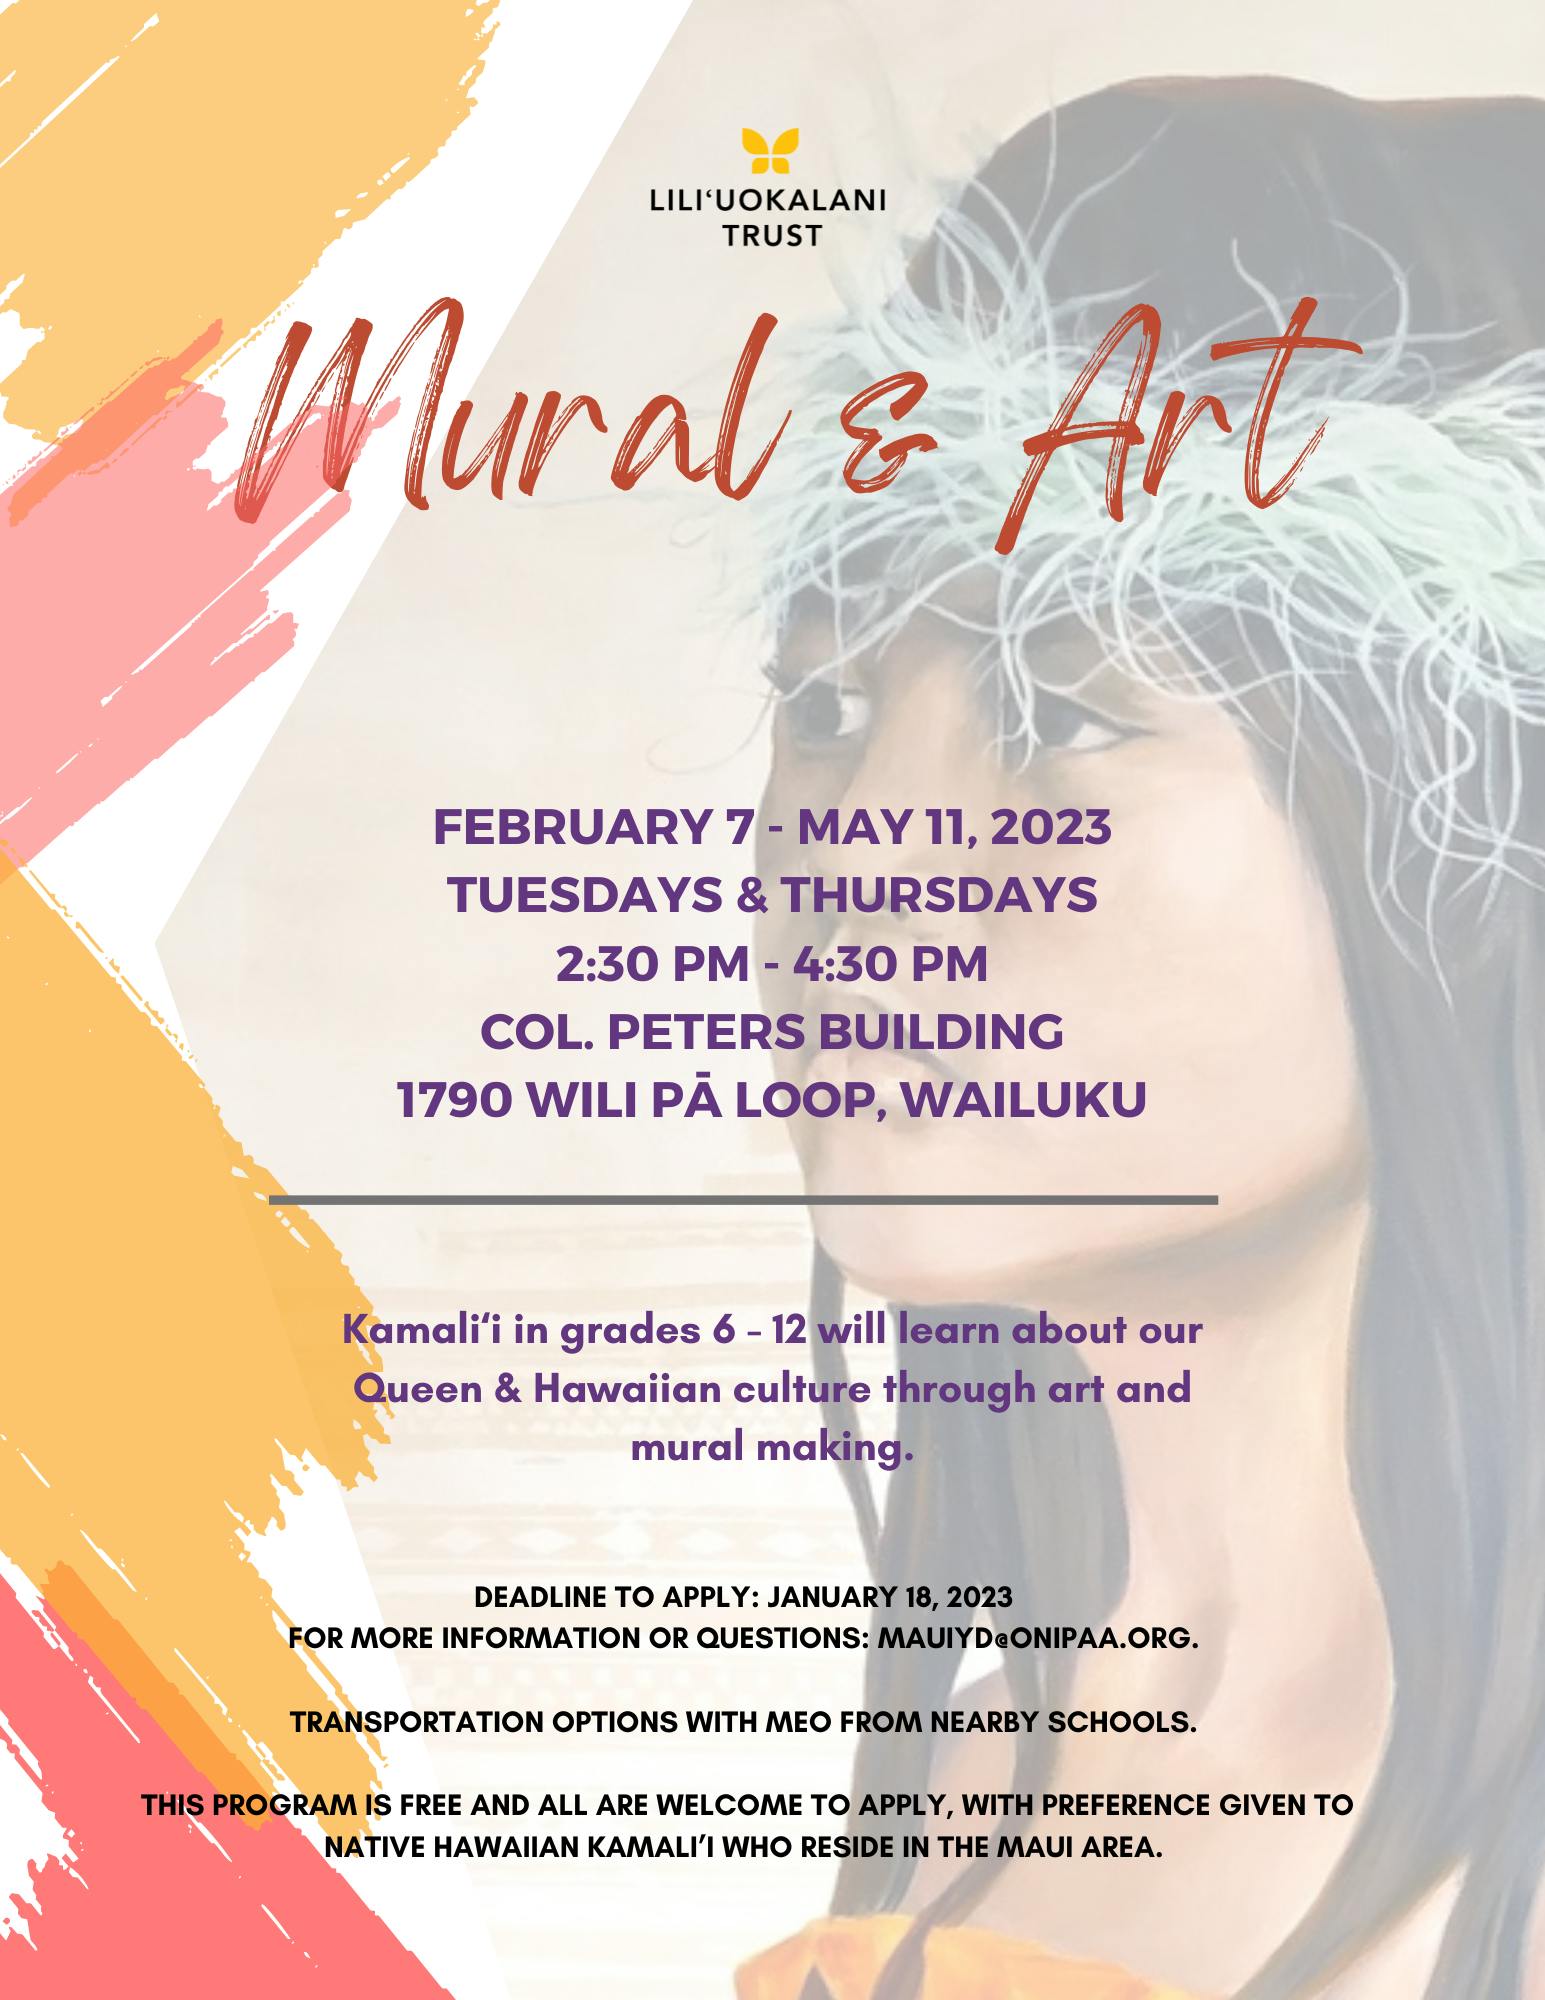 A post of Mural & Art, a creative art program on Maui where Kamaliʻi (children) in grades 6-12 will learn about Queen Liliʻuokalani and Hawaiian culture through mural making.